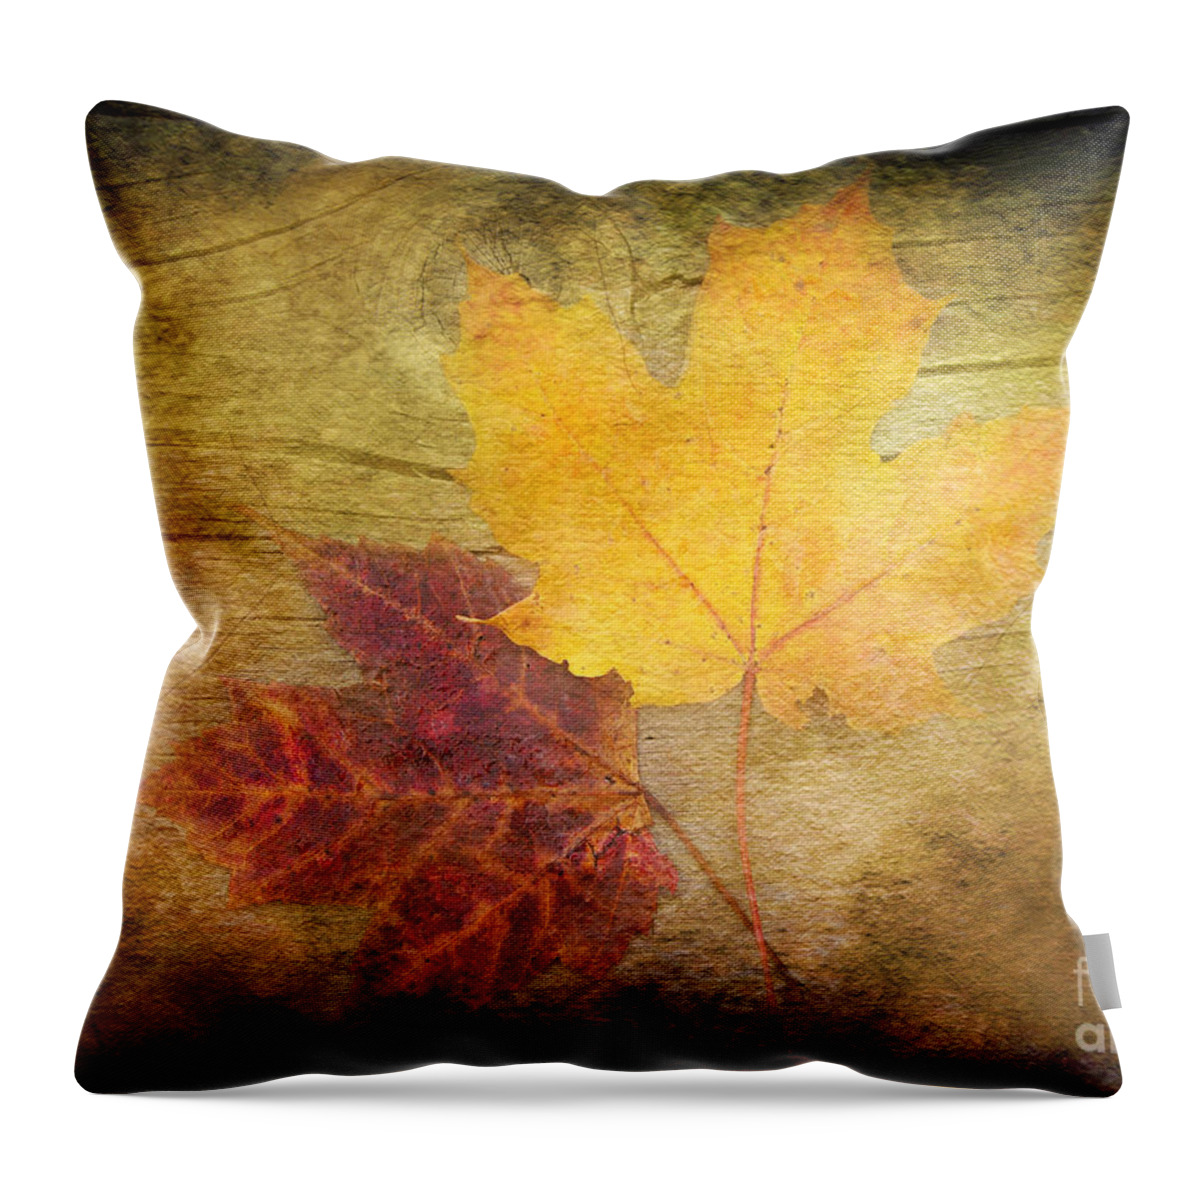 Autumn Leaves Throw Pillow featuring the photograph Two Autumn Leaves by Kathi Mirto